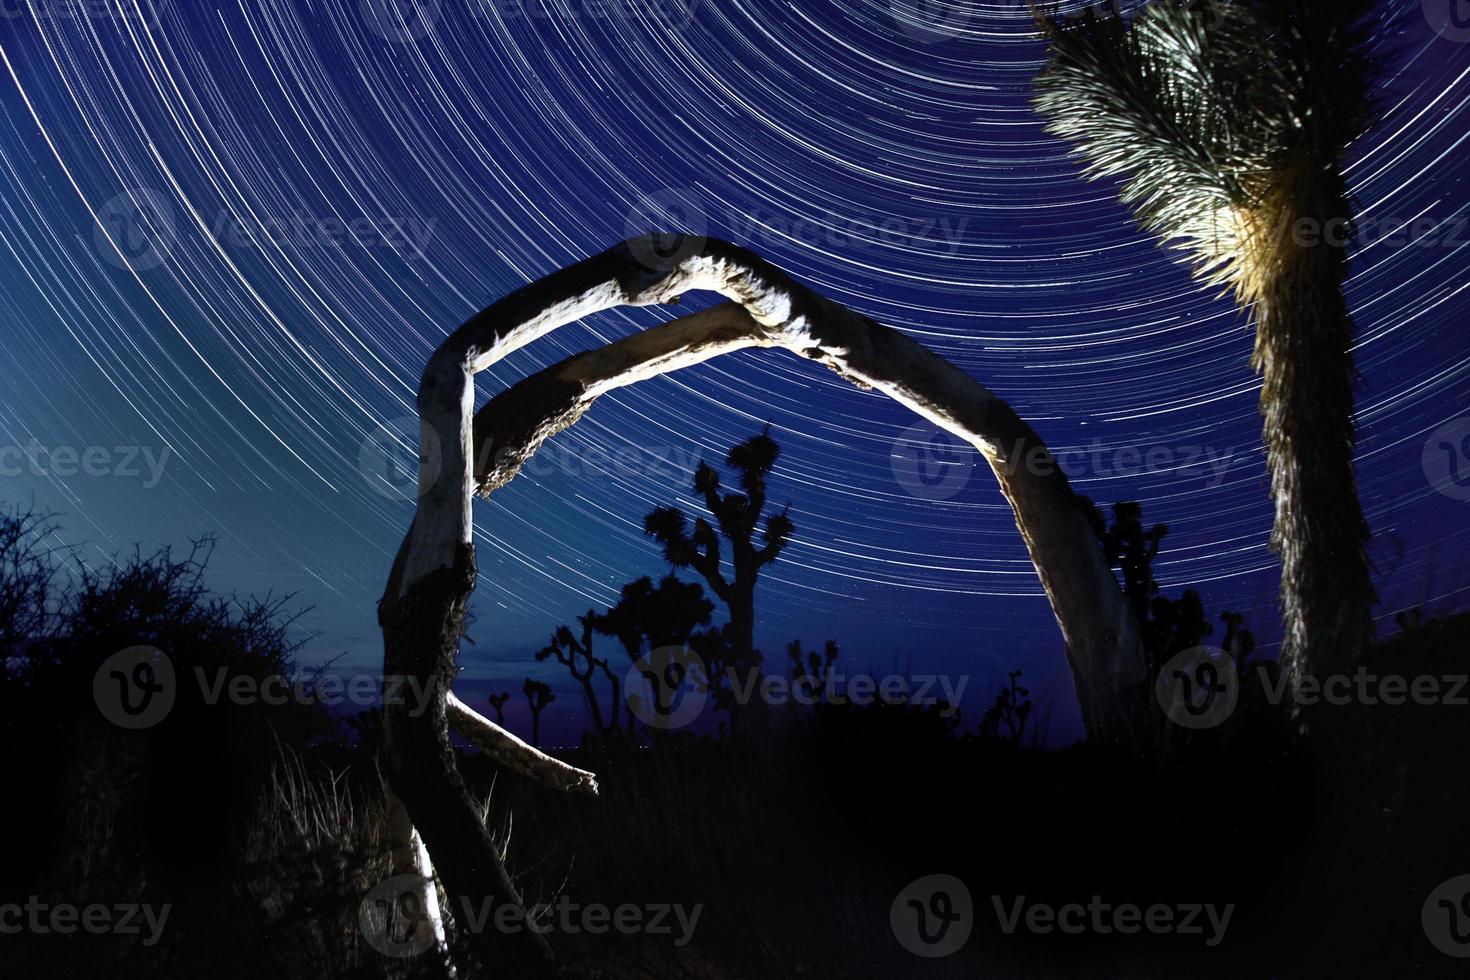 Star Trails in Joshua Tree National Park photo